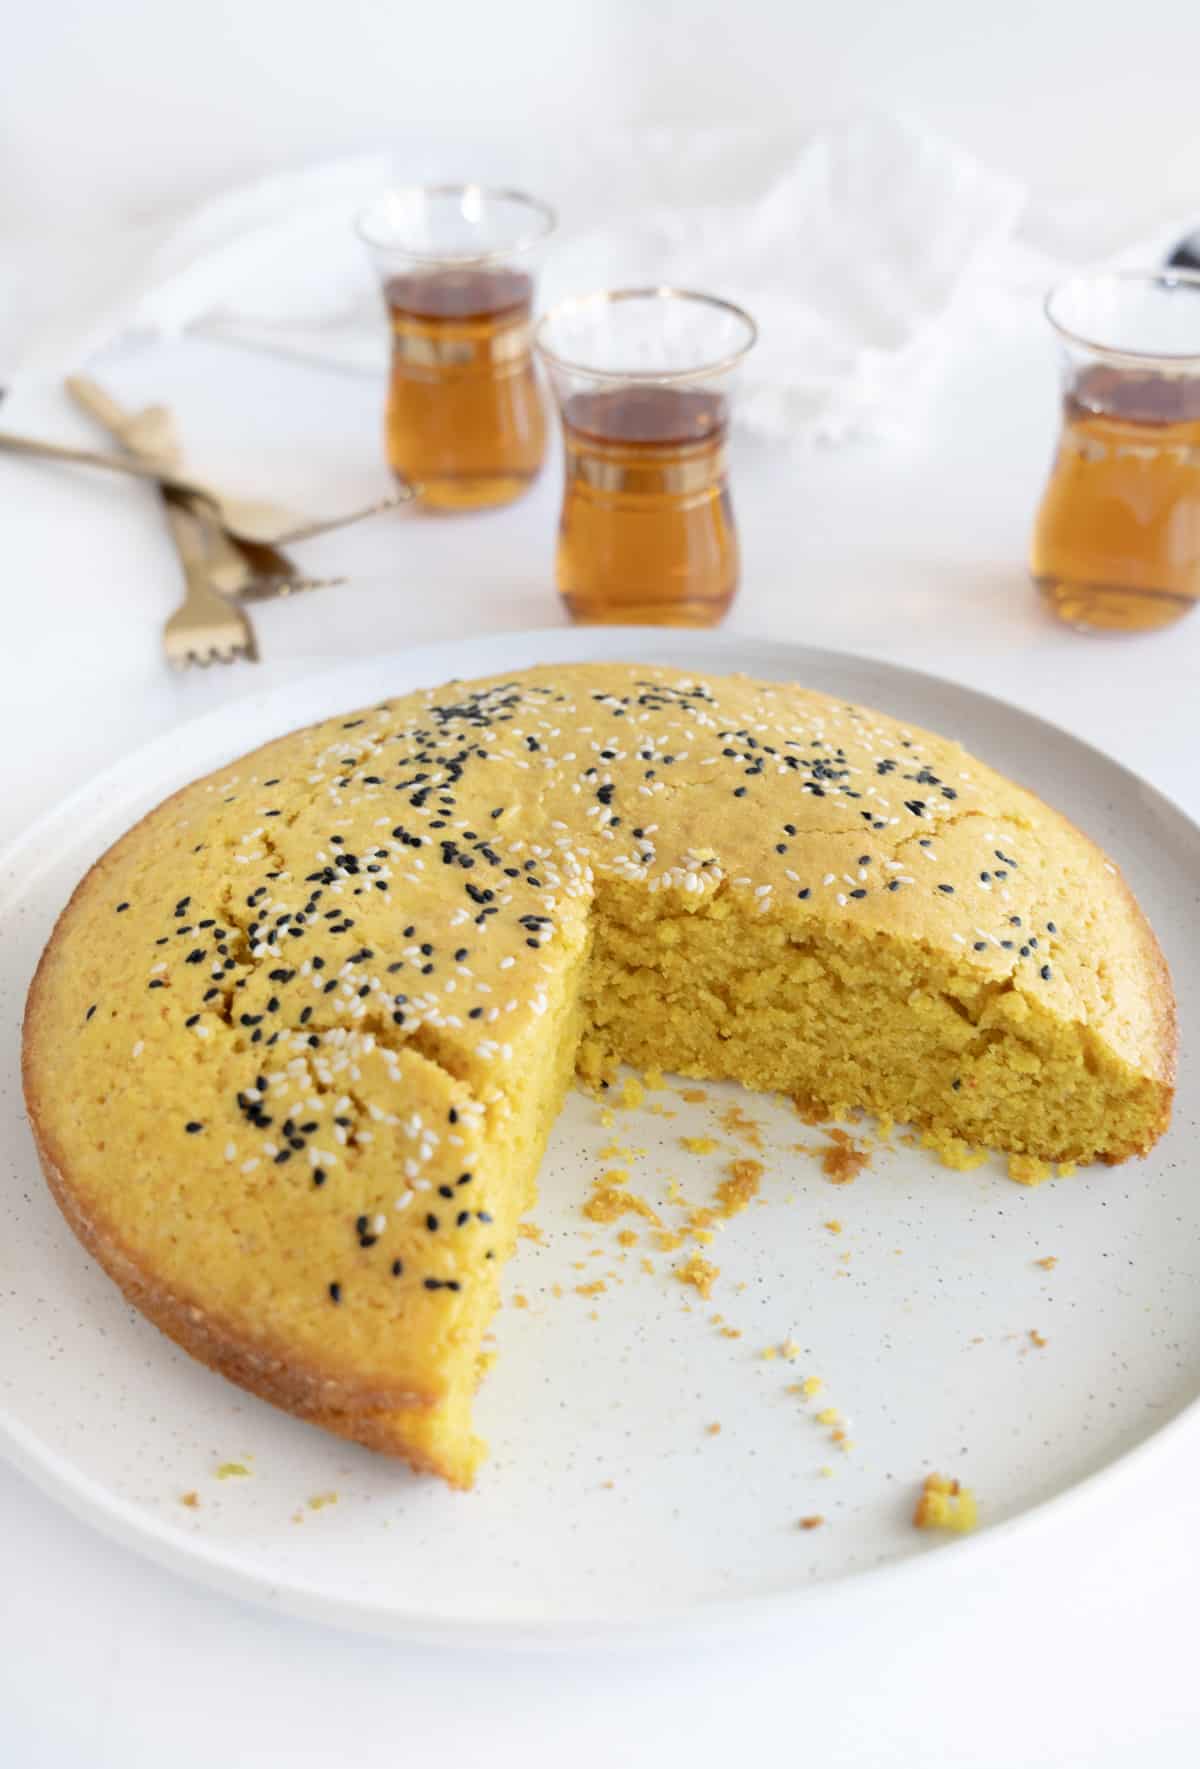 a round yellow turmeric semolina cake with a slice missing from it